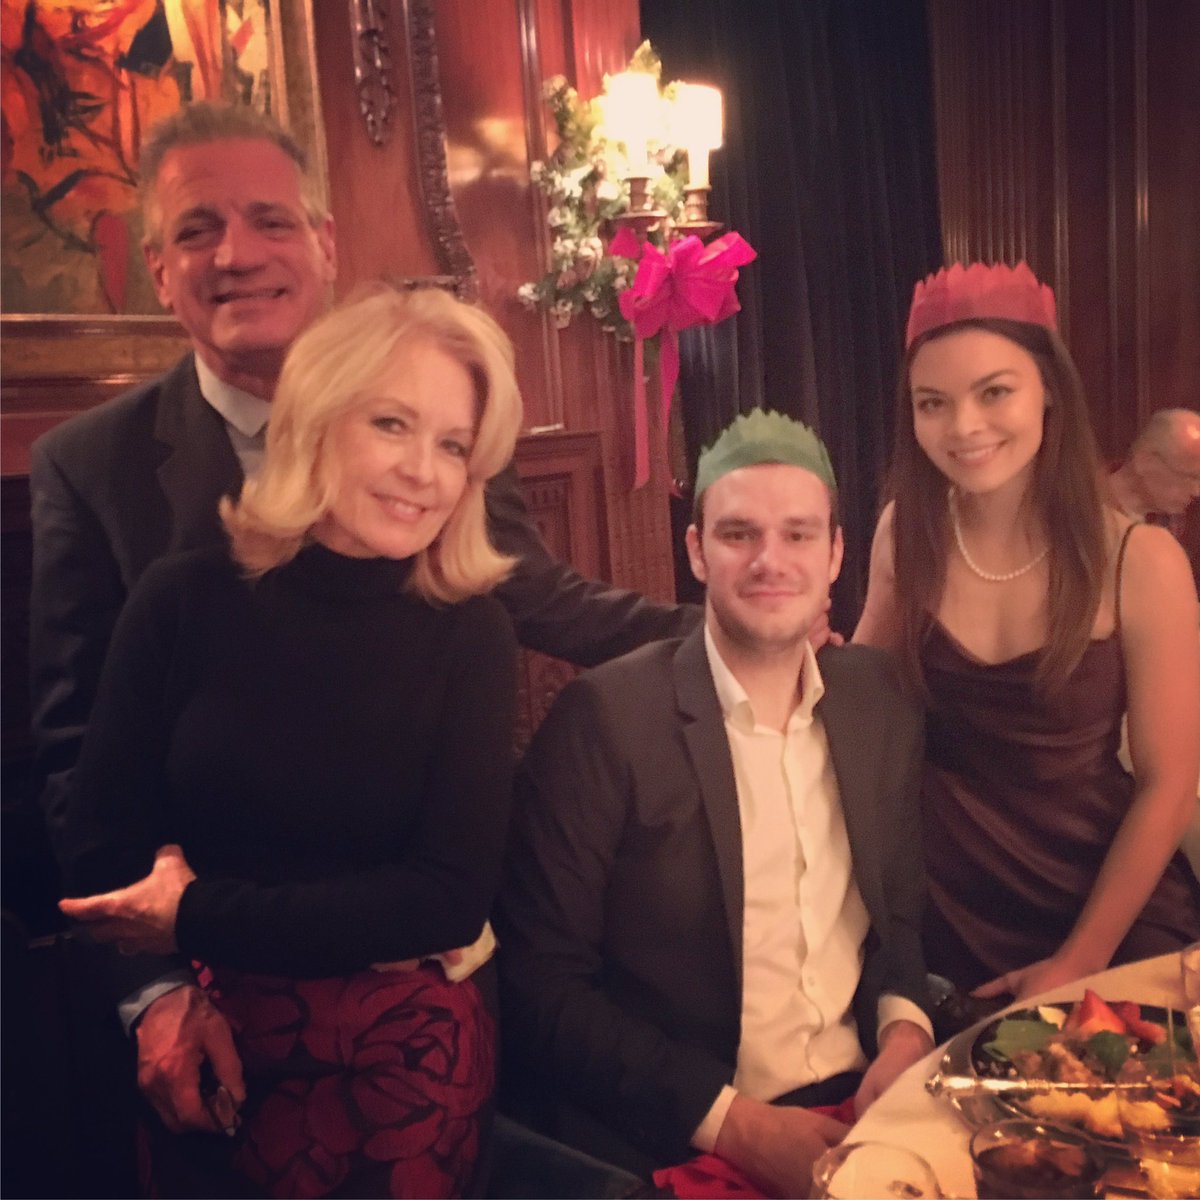 RT @cooperhefner: Christmas din with family and friends #HappyHolidaysEveryone https://t.co/Wlv7JfbSih